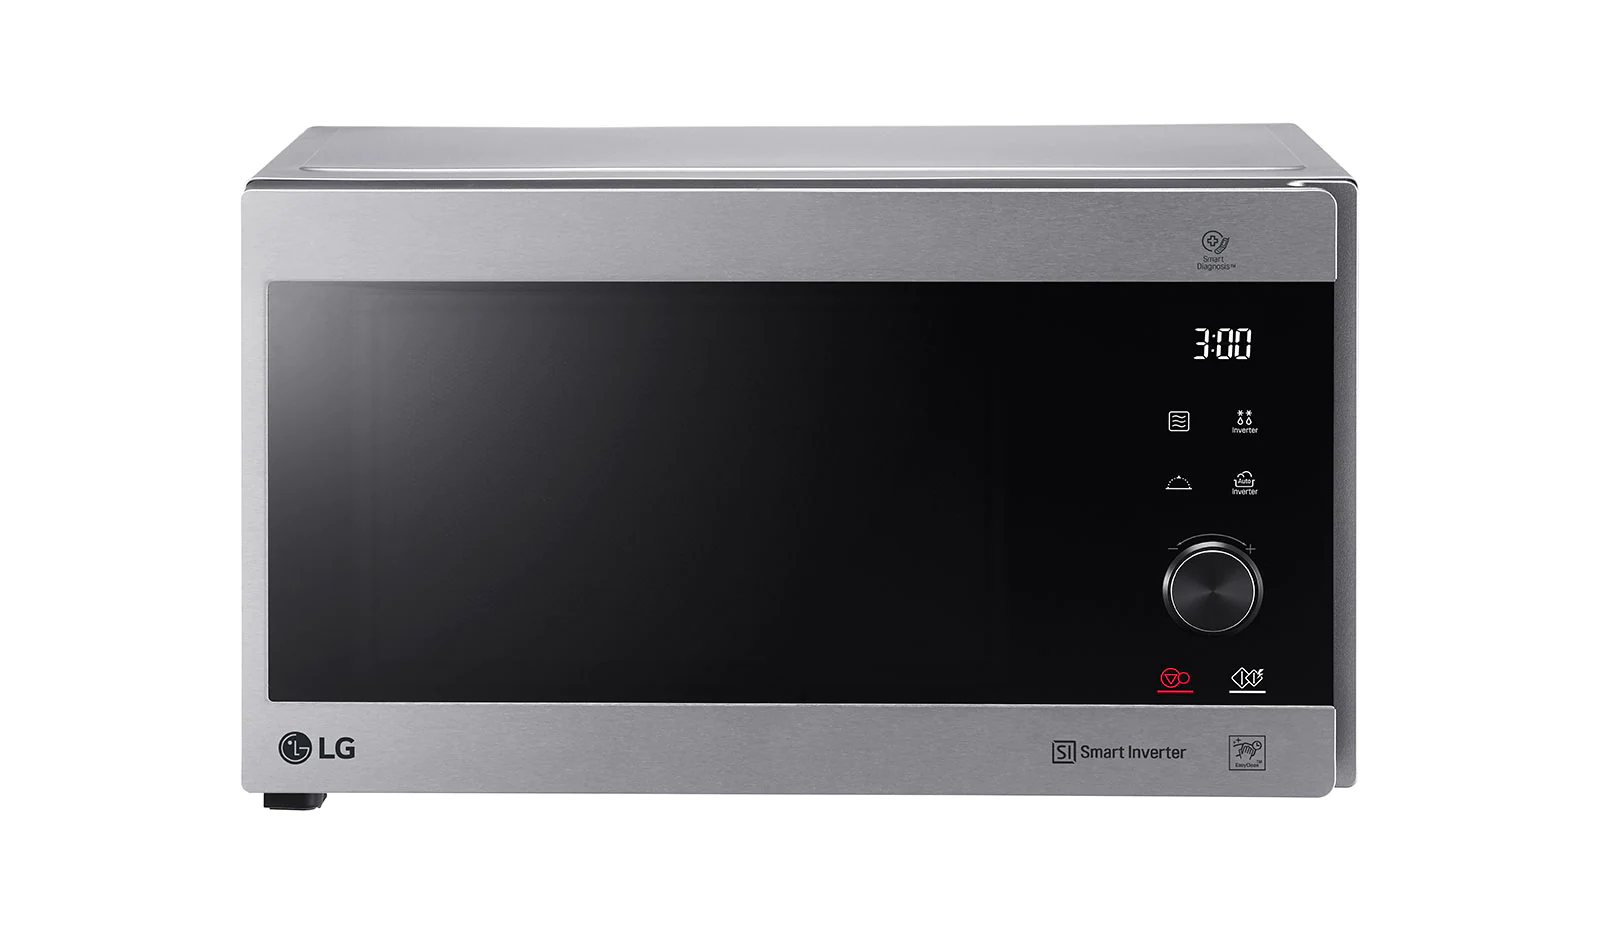 LG MH8265CIS 1200W 42L Microwave Oven